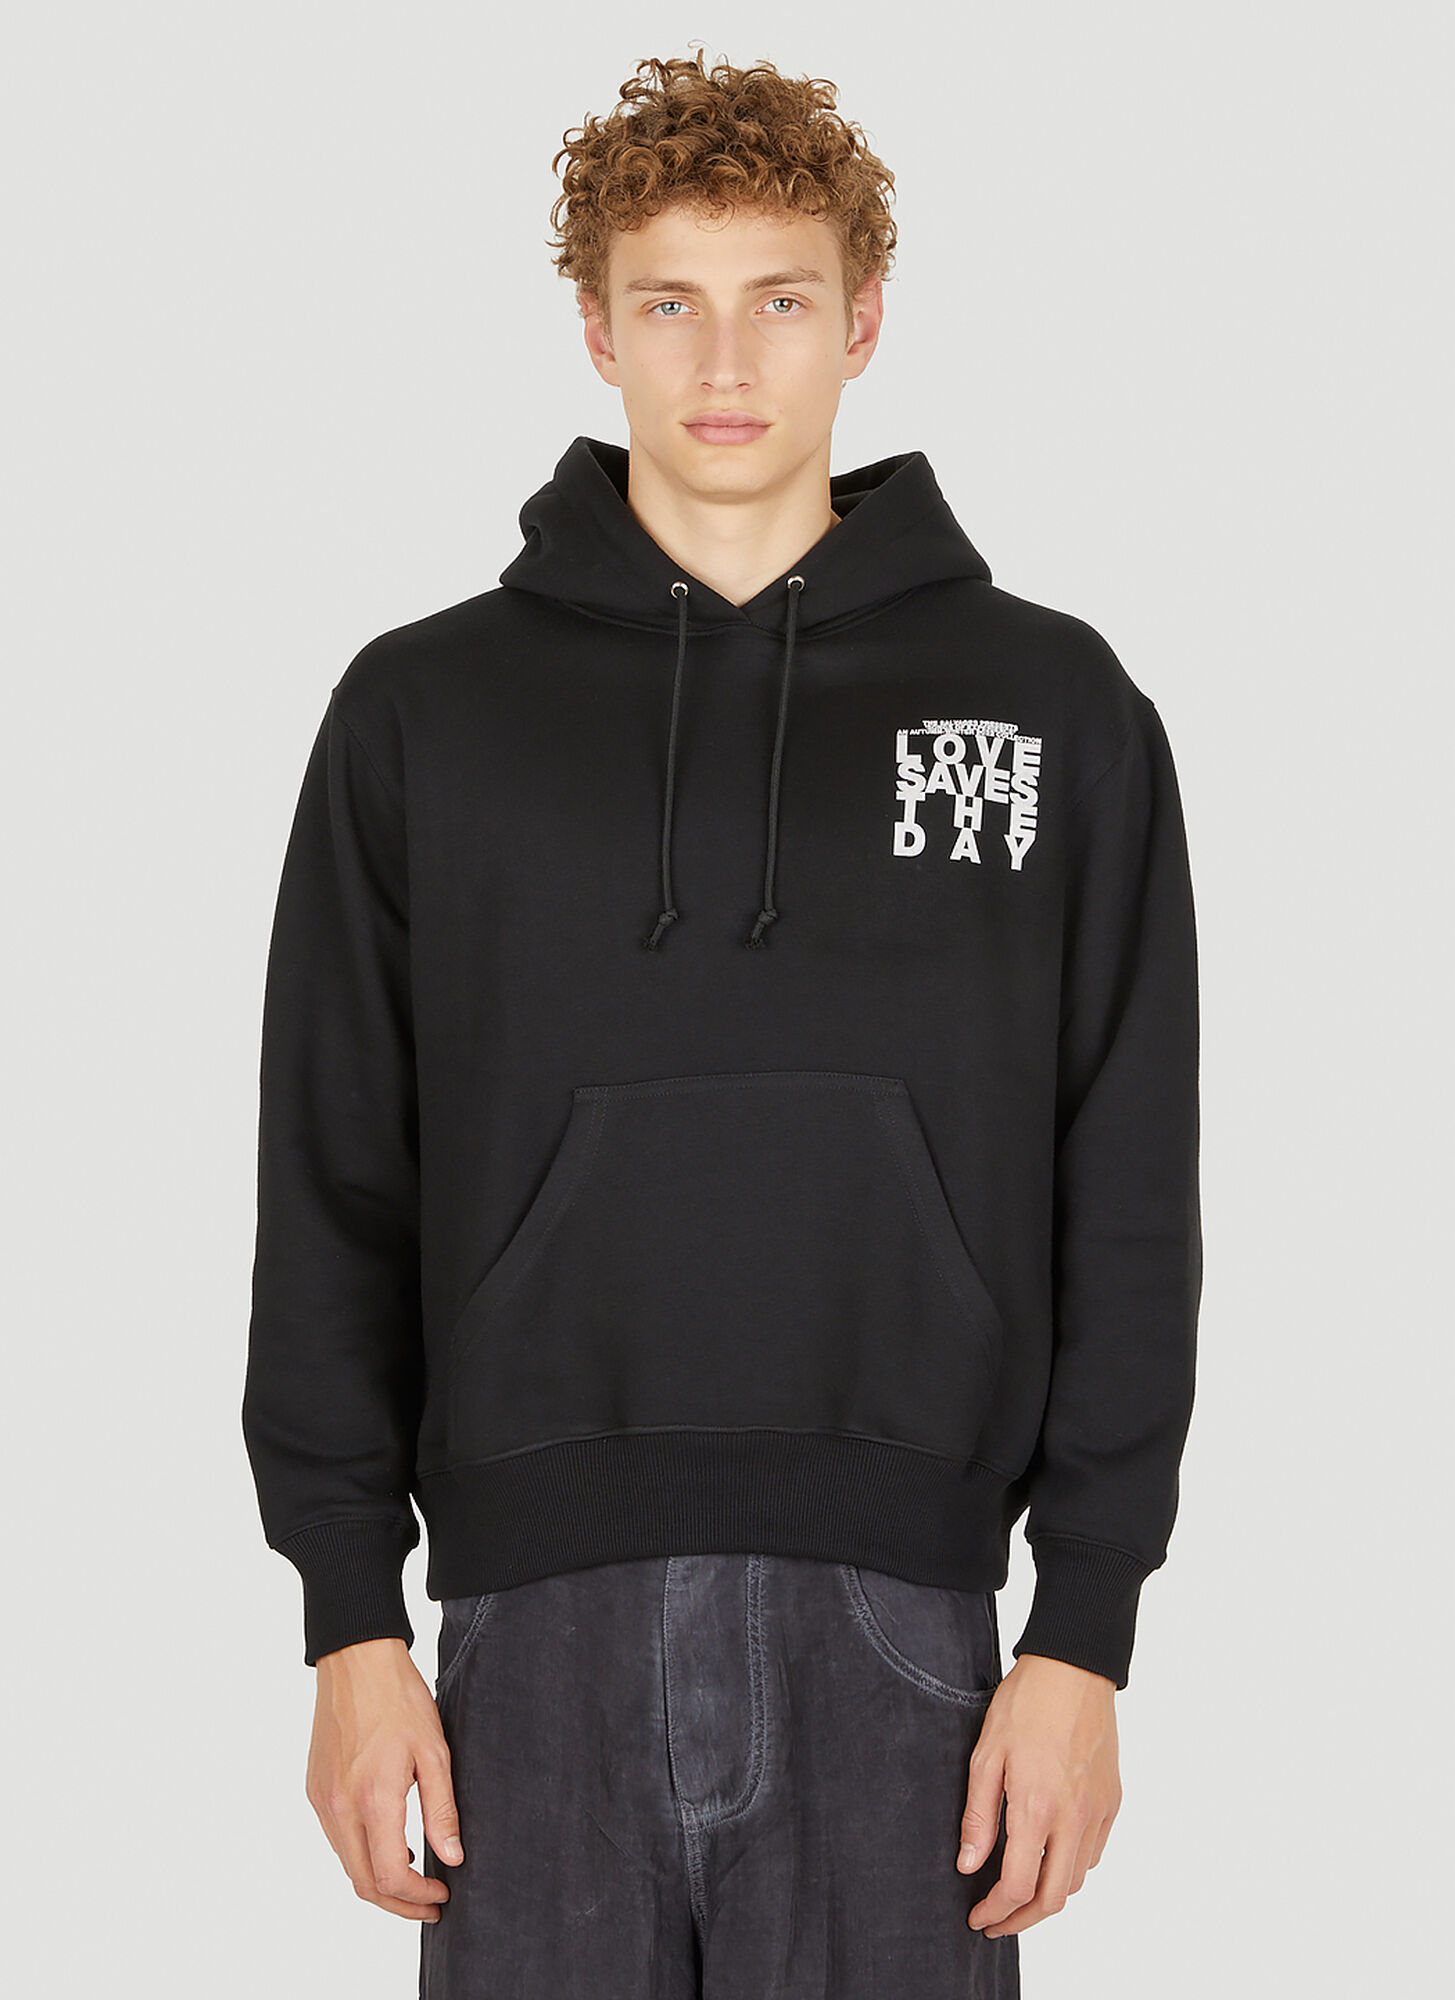 Shop The Salvages Love Saves The Day Hooded Sweatshirt In Black